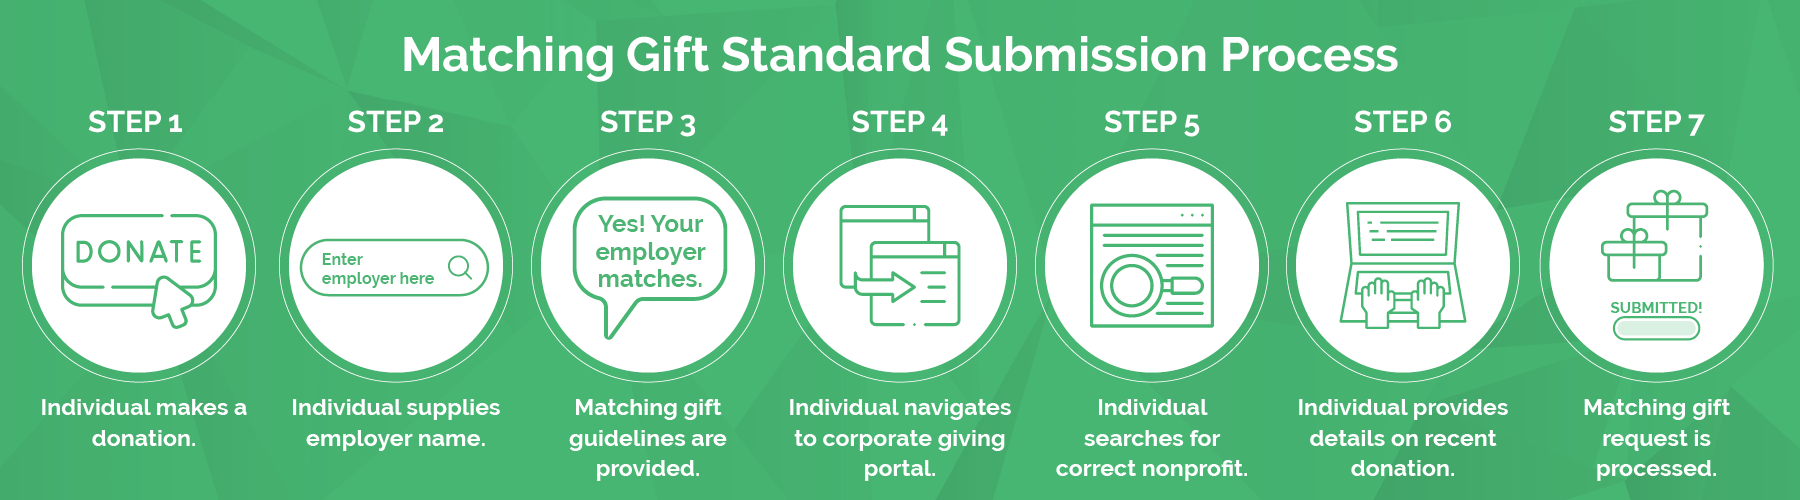 Standard matching gift submission process